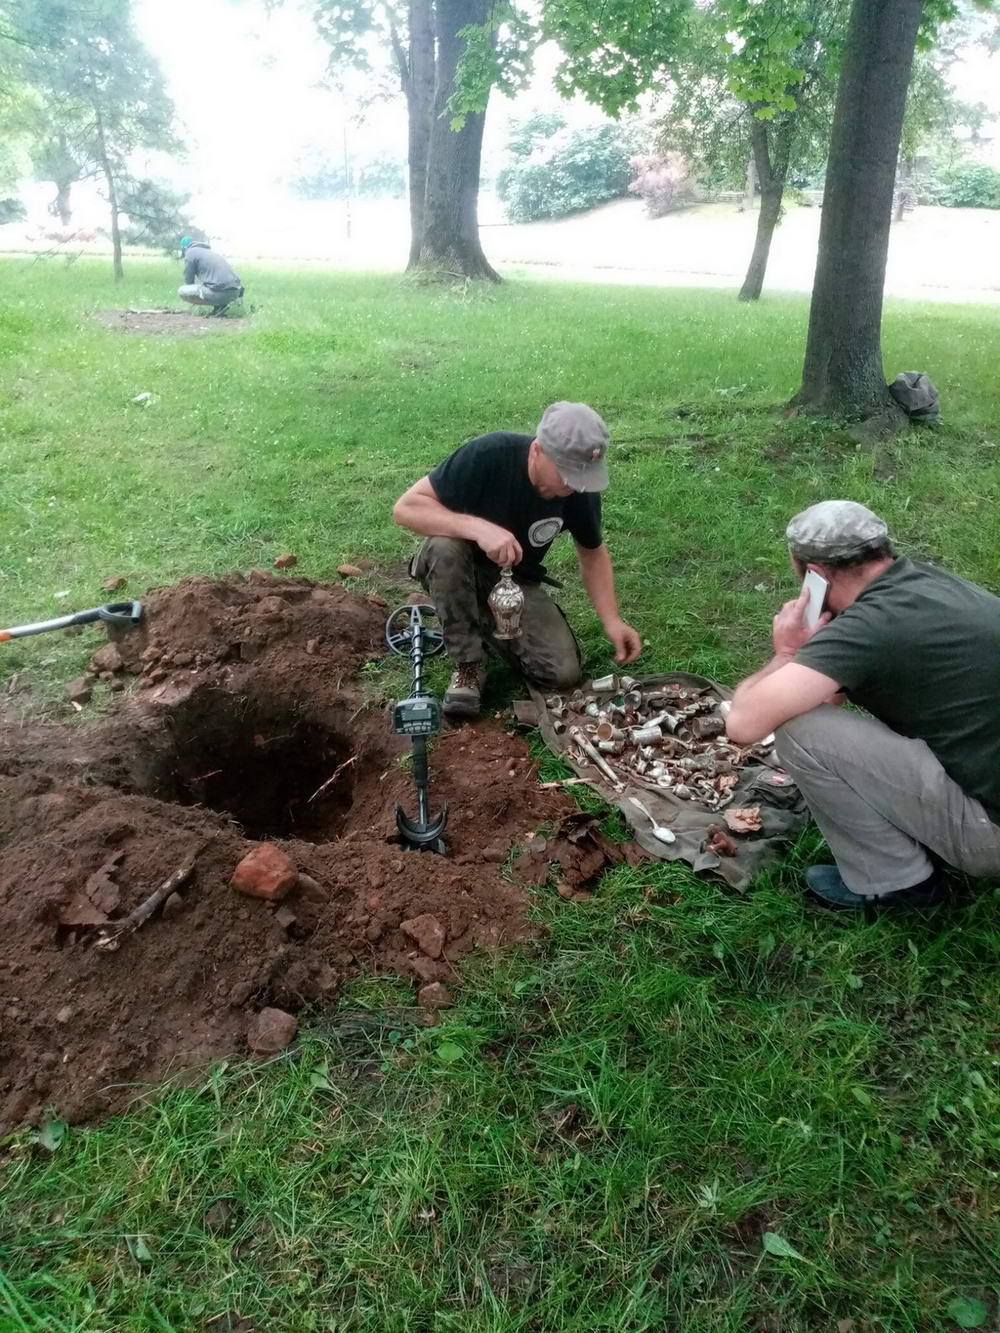 group of men digging up an old silver treasure